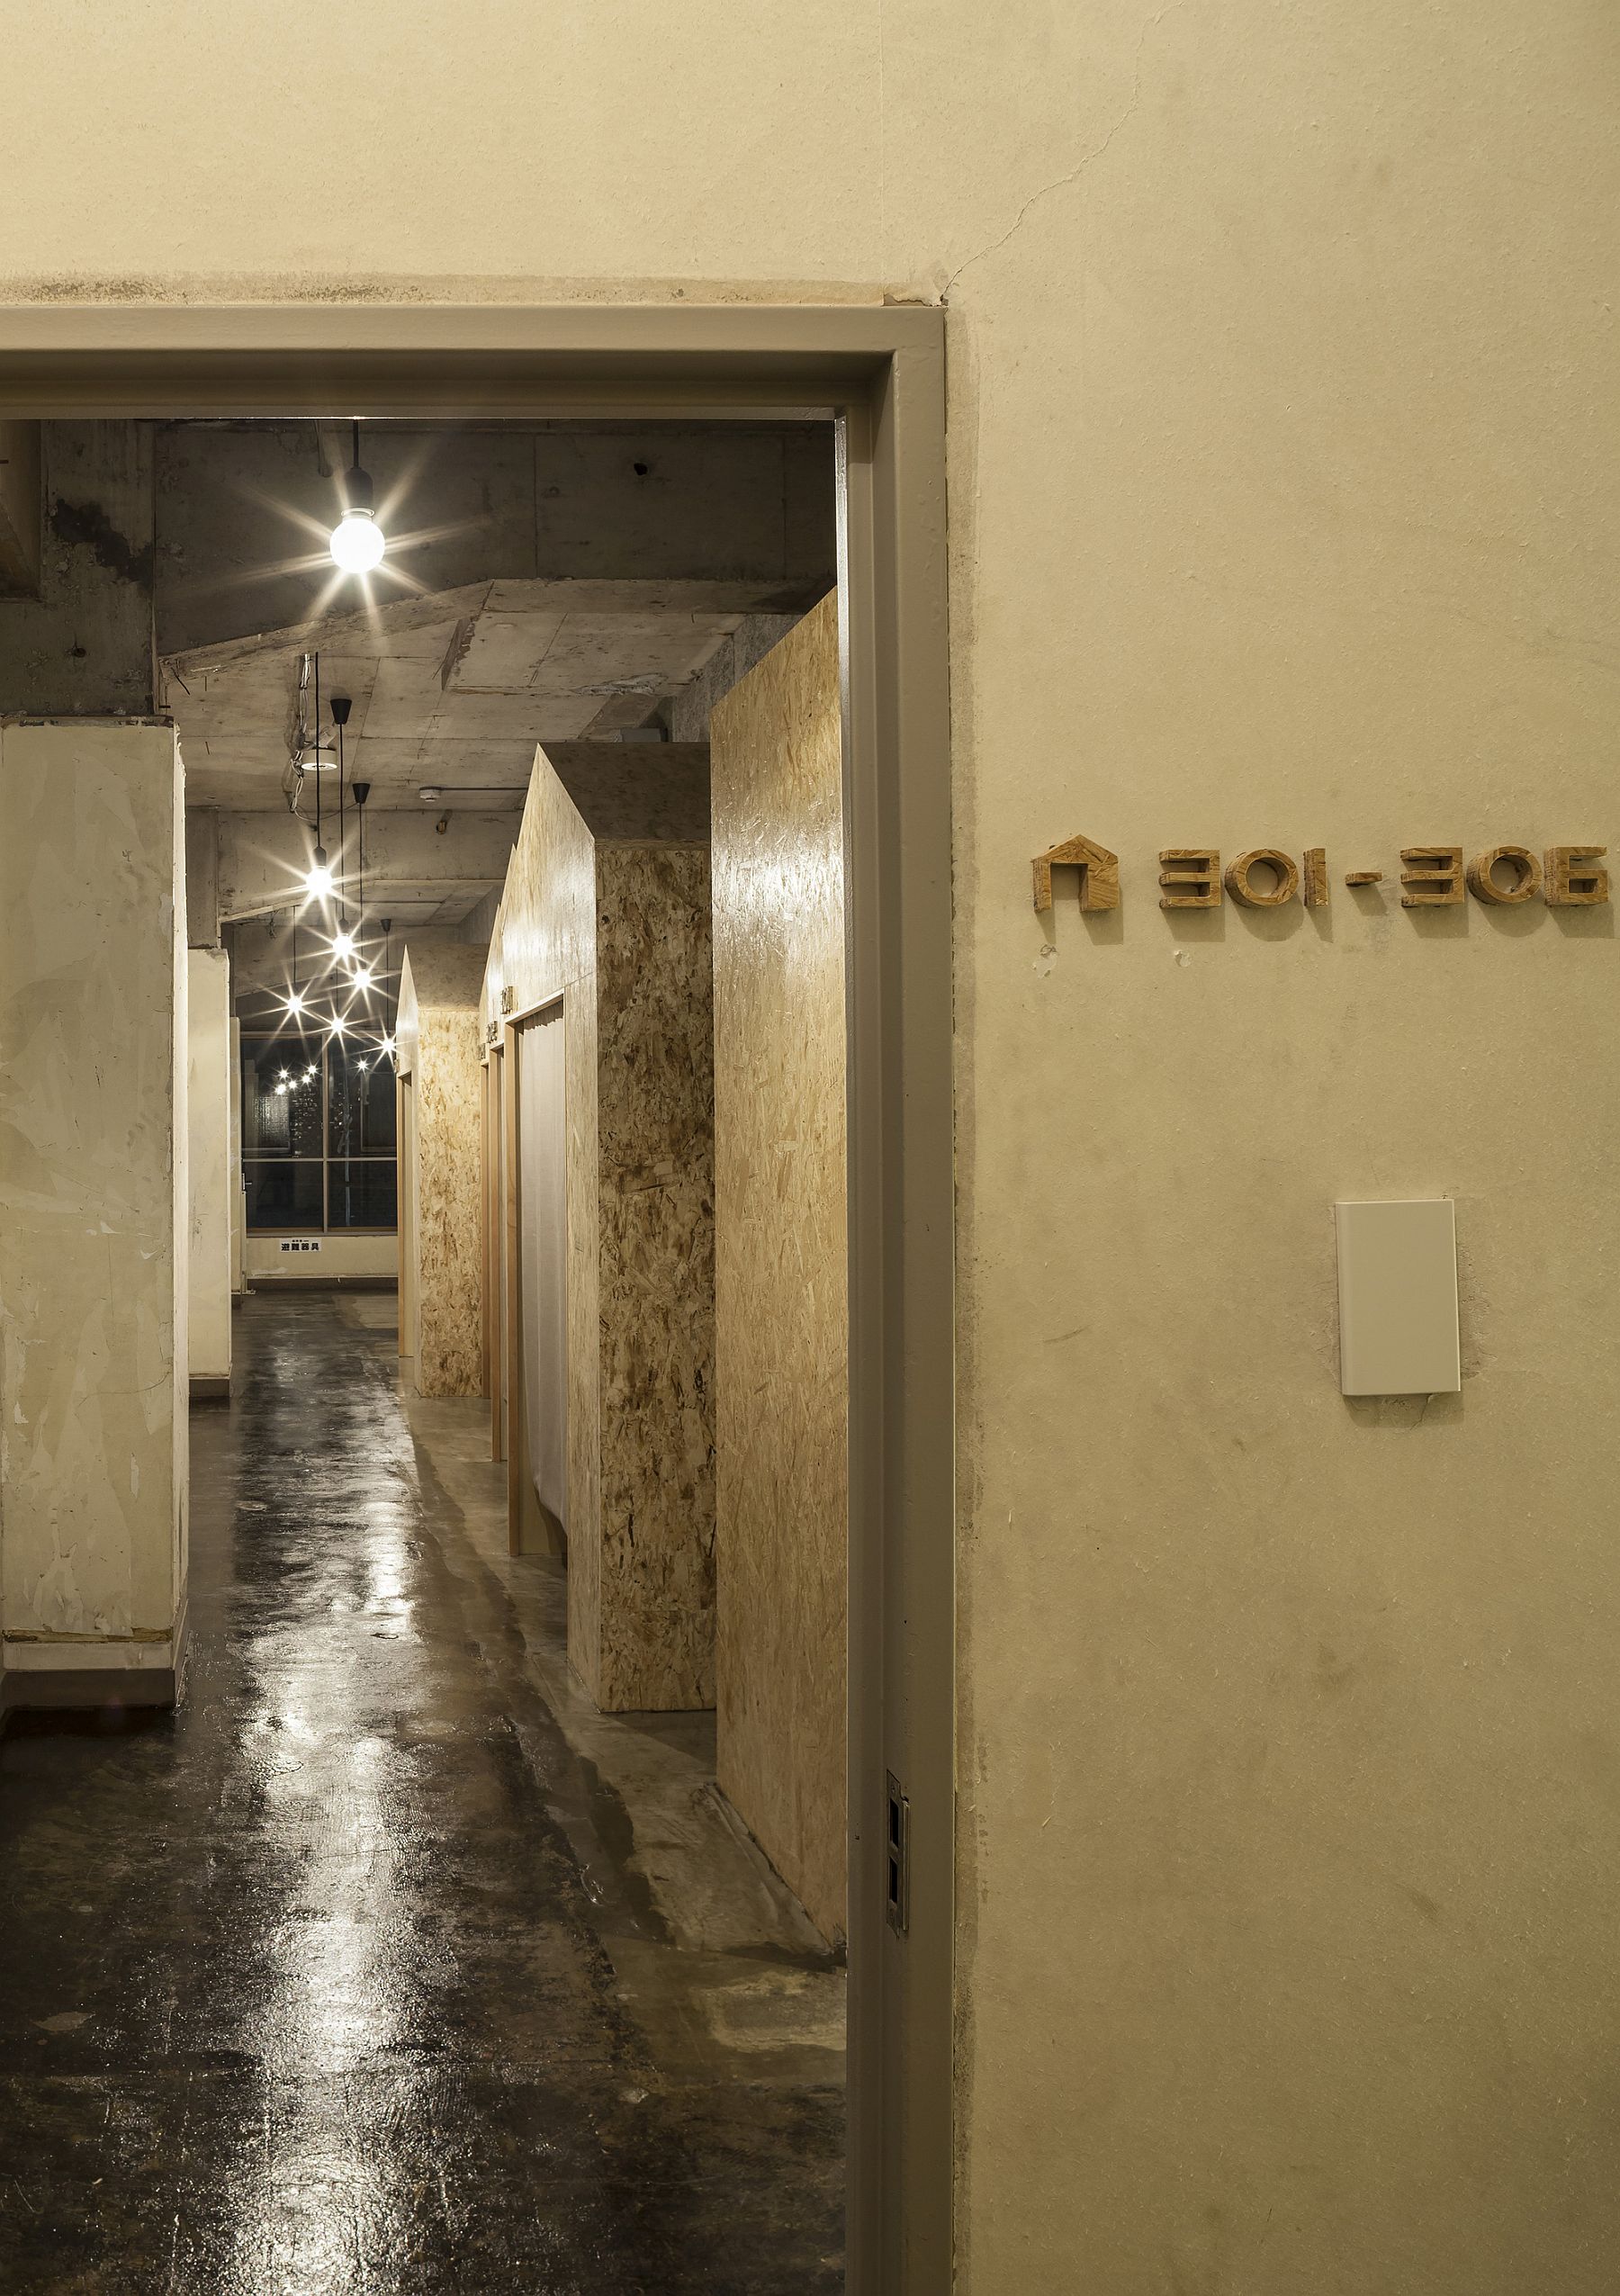 Textured walls and restored finishes give the hostel a timeless look